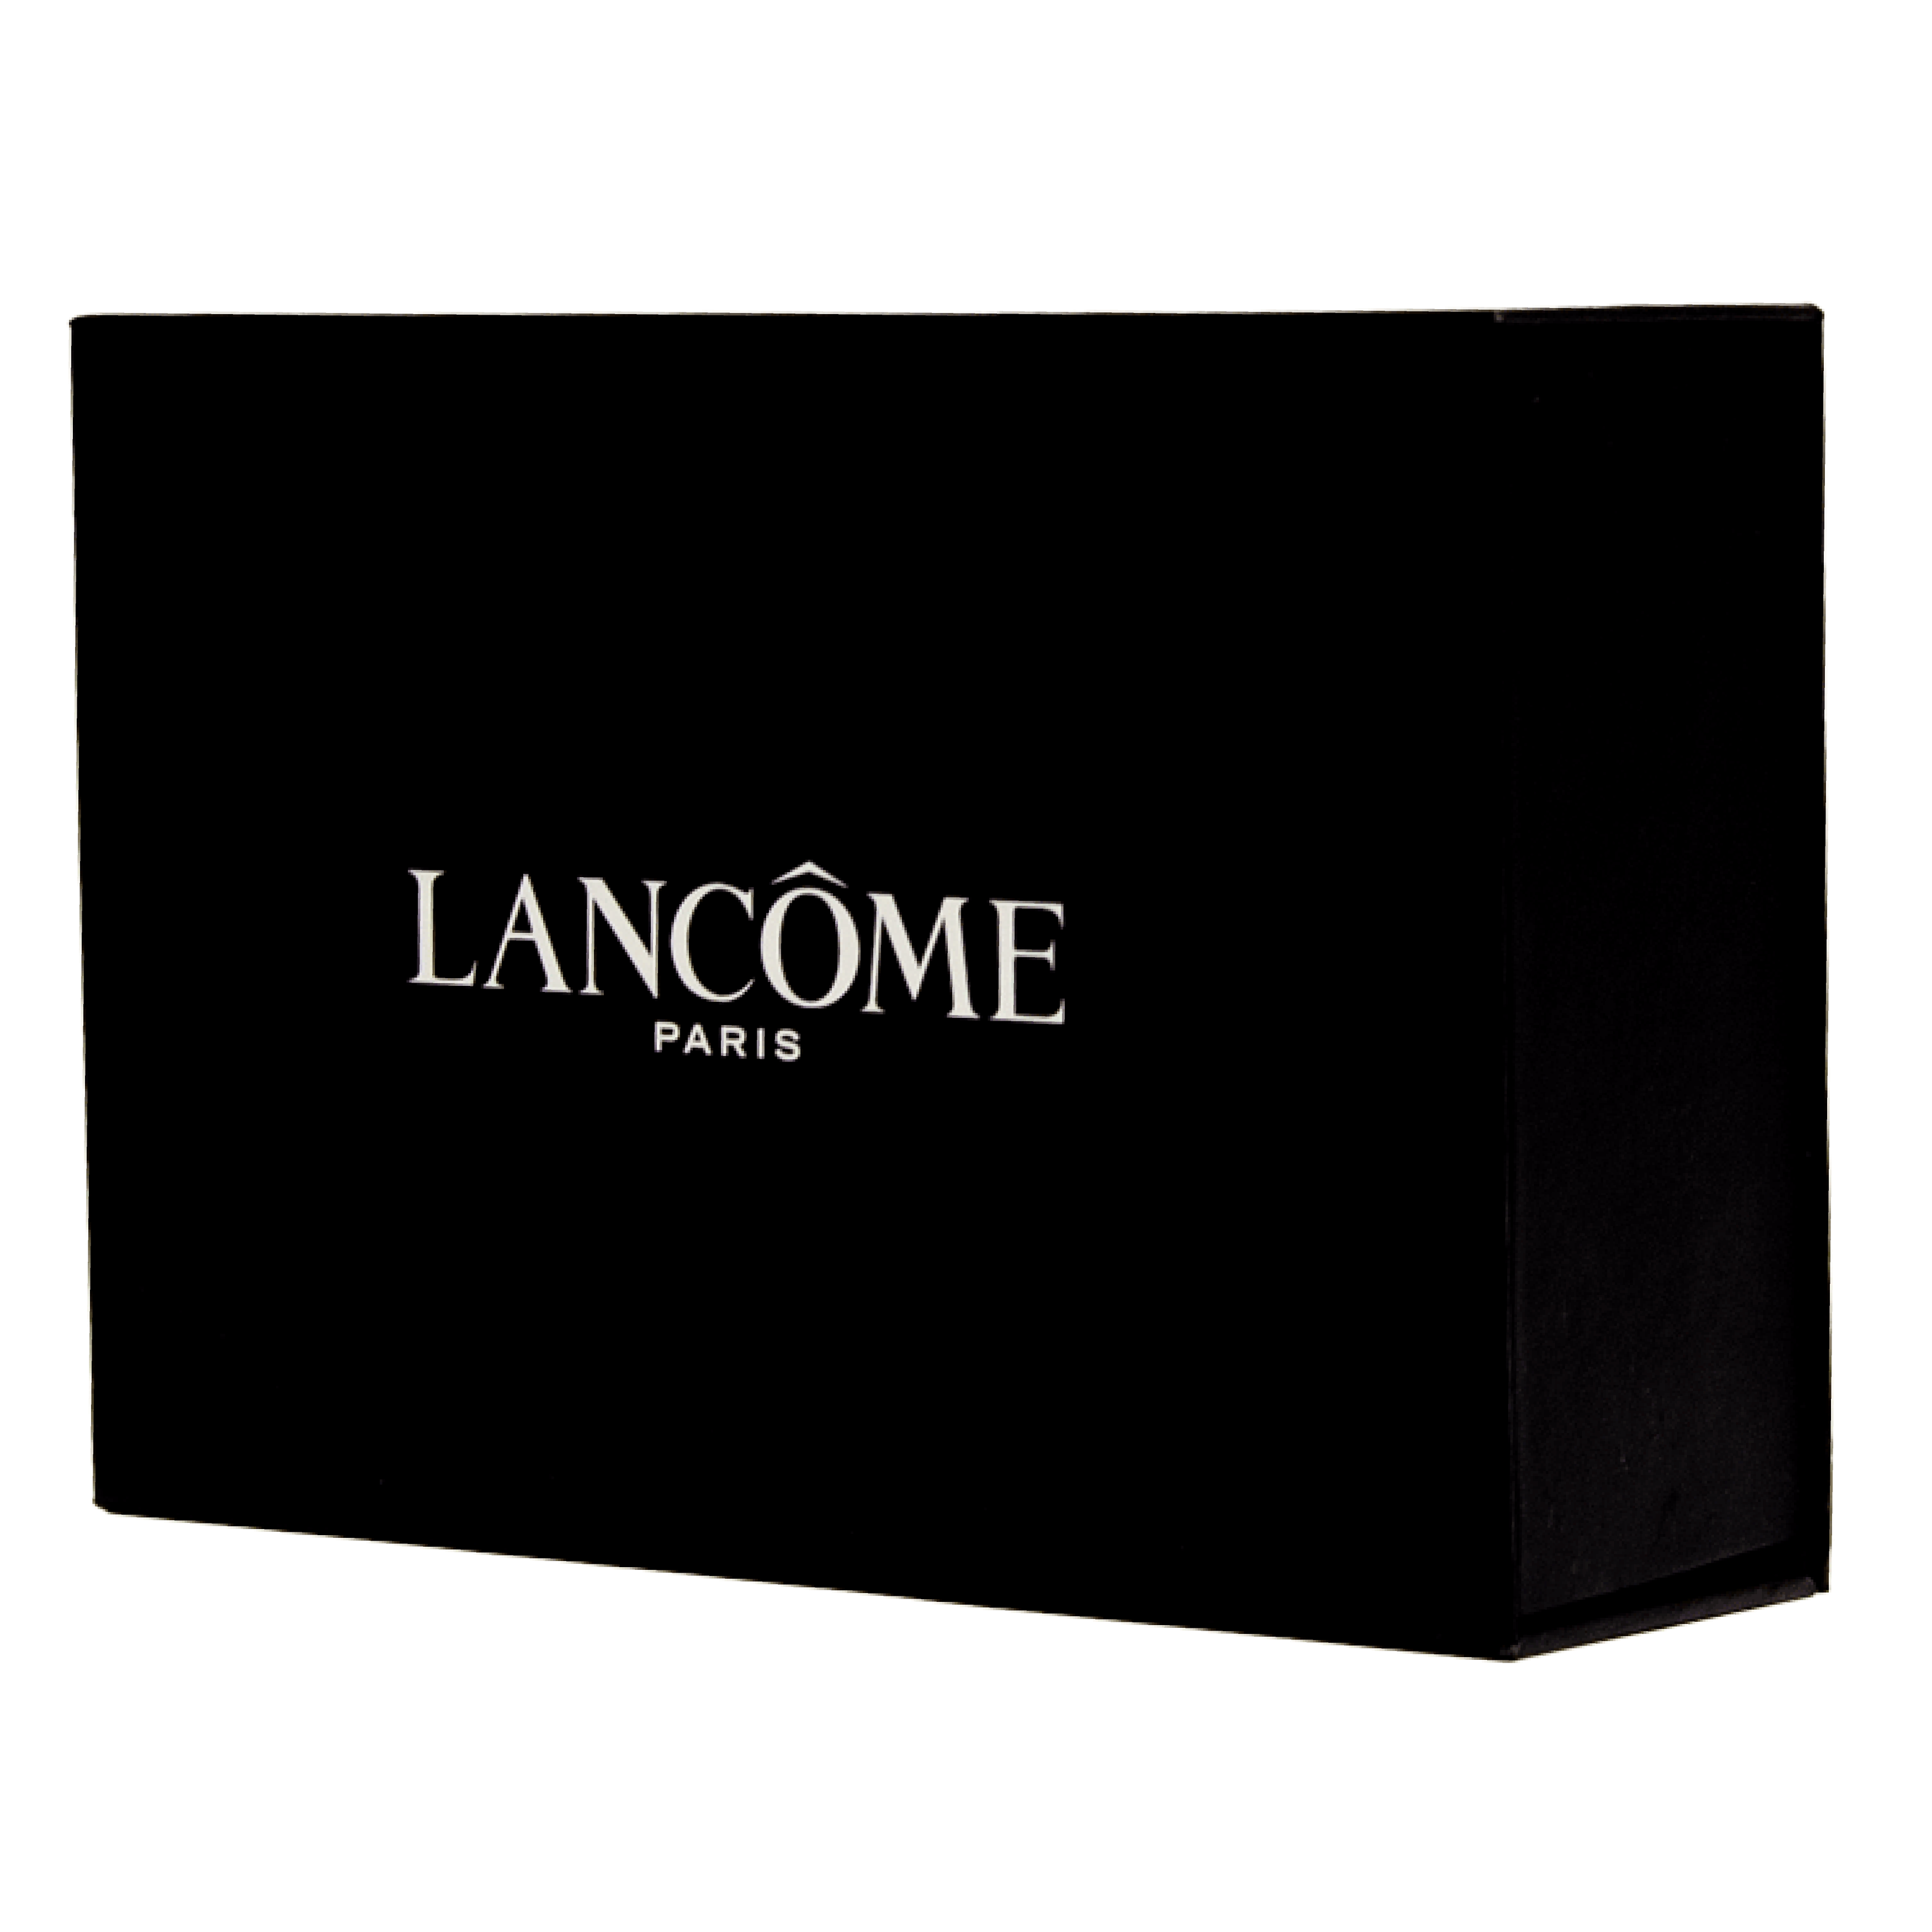 Product-Page-Icons---Lancome-weblowres